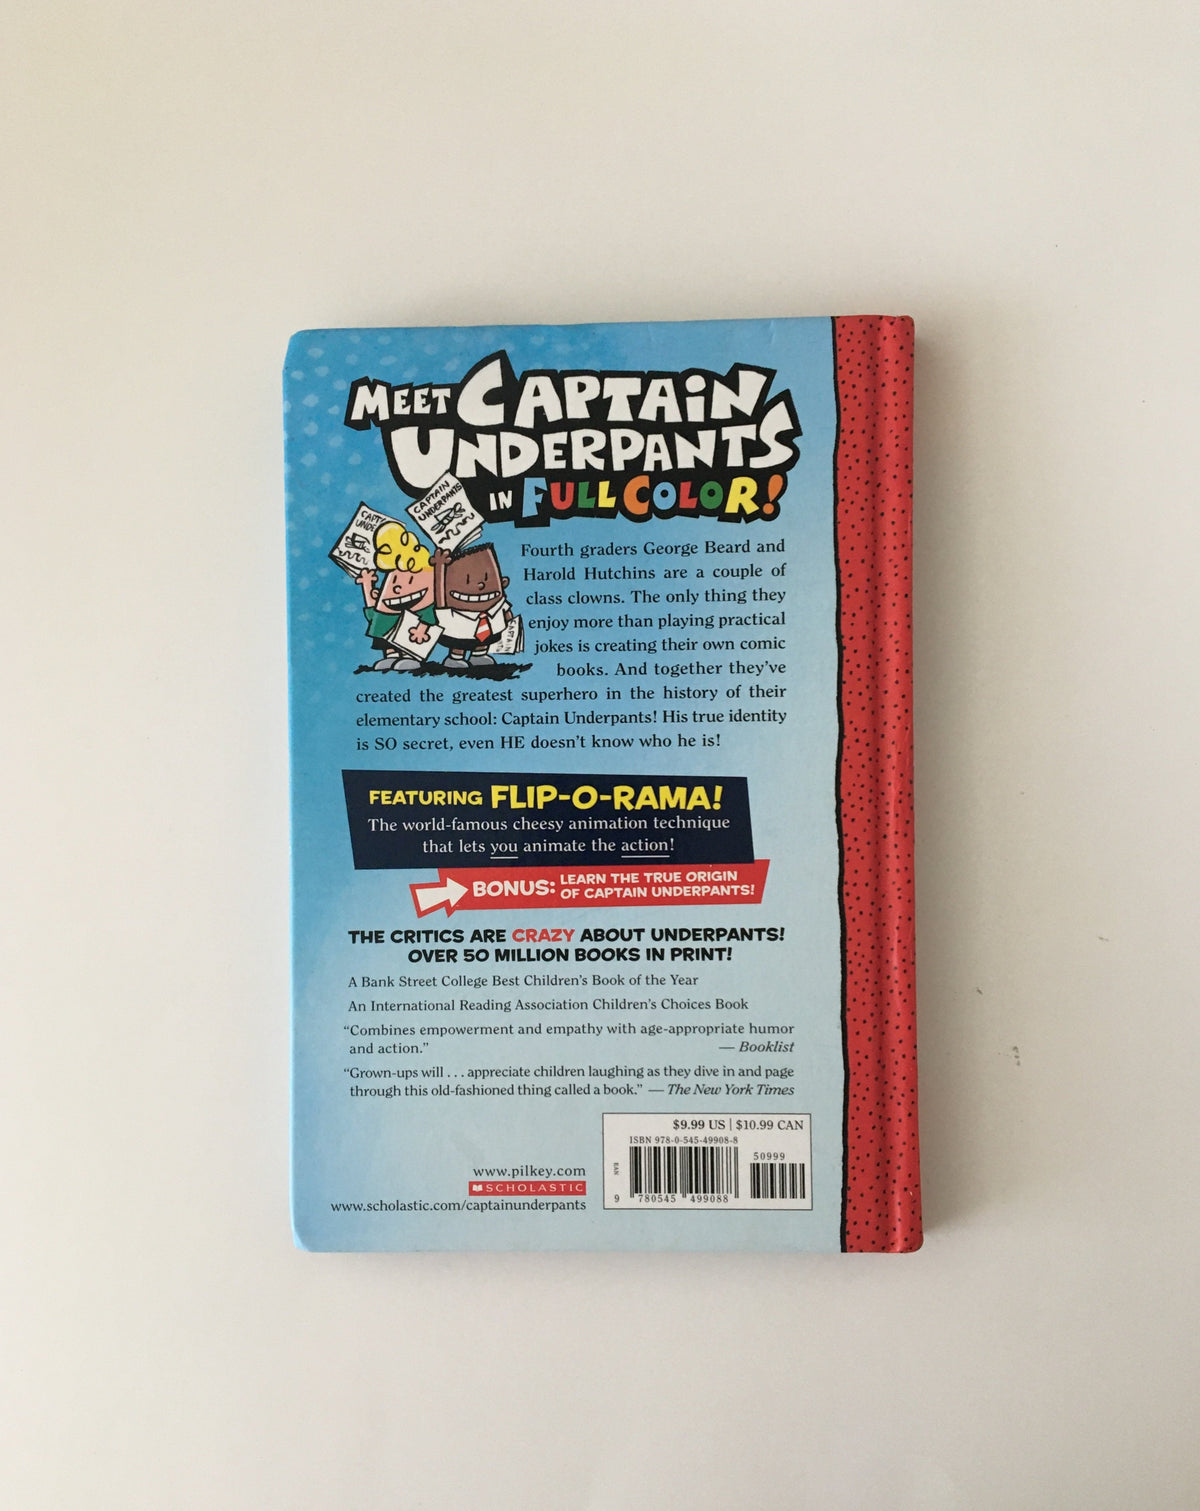 The Adventures of Captain Underpants by Dav Pilkey